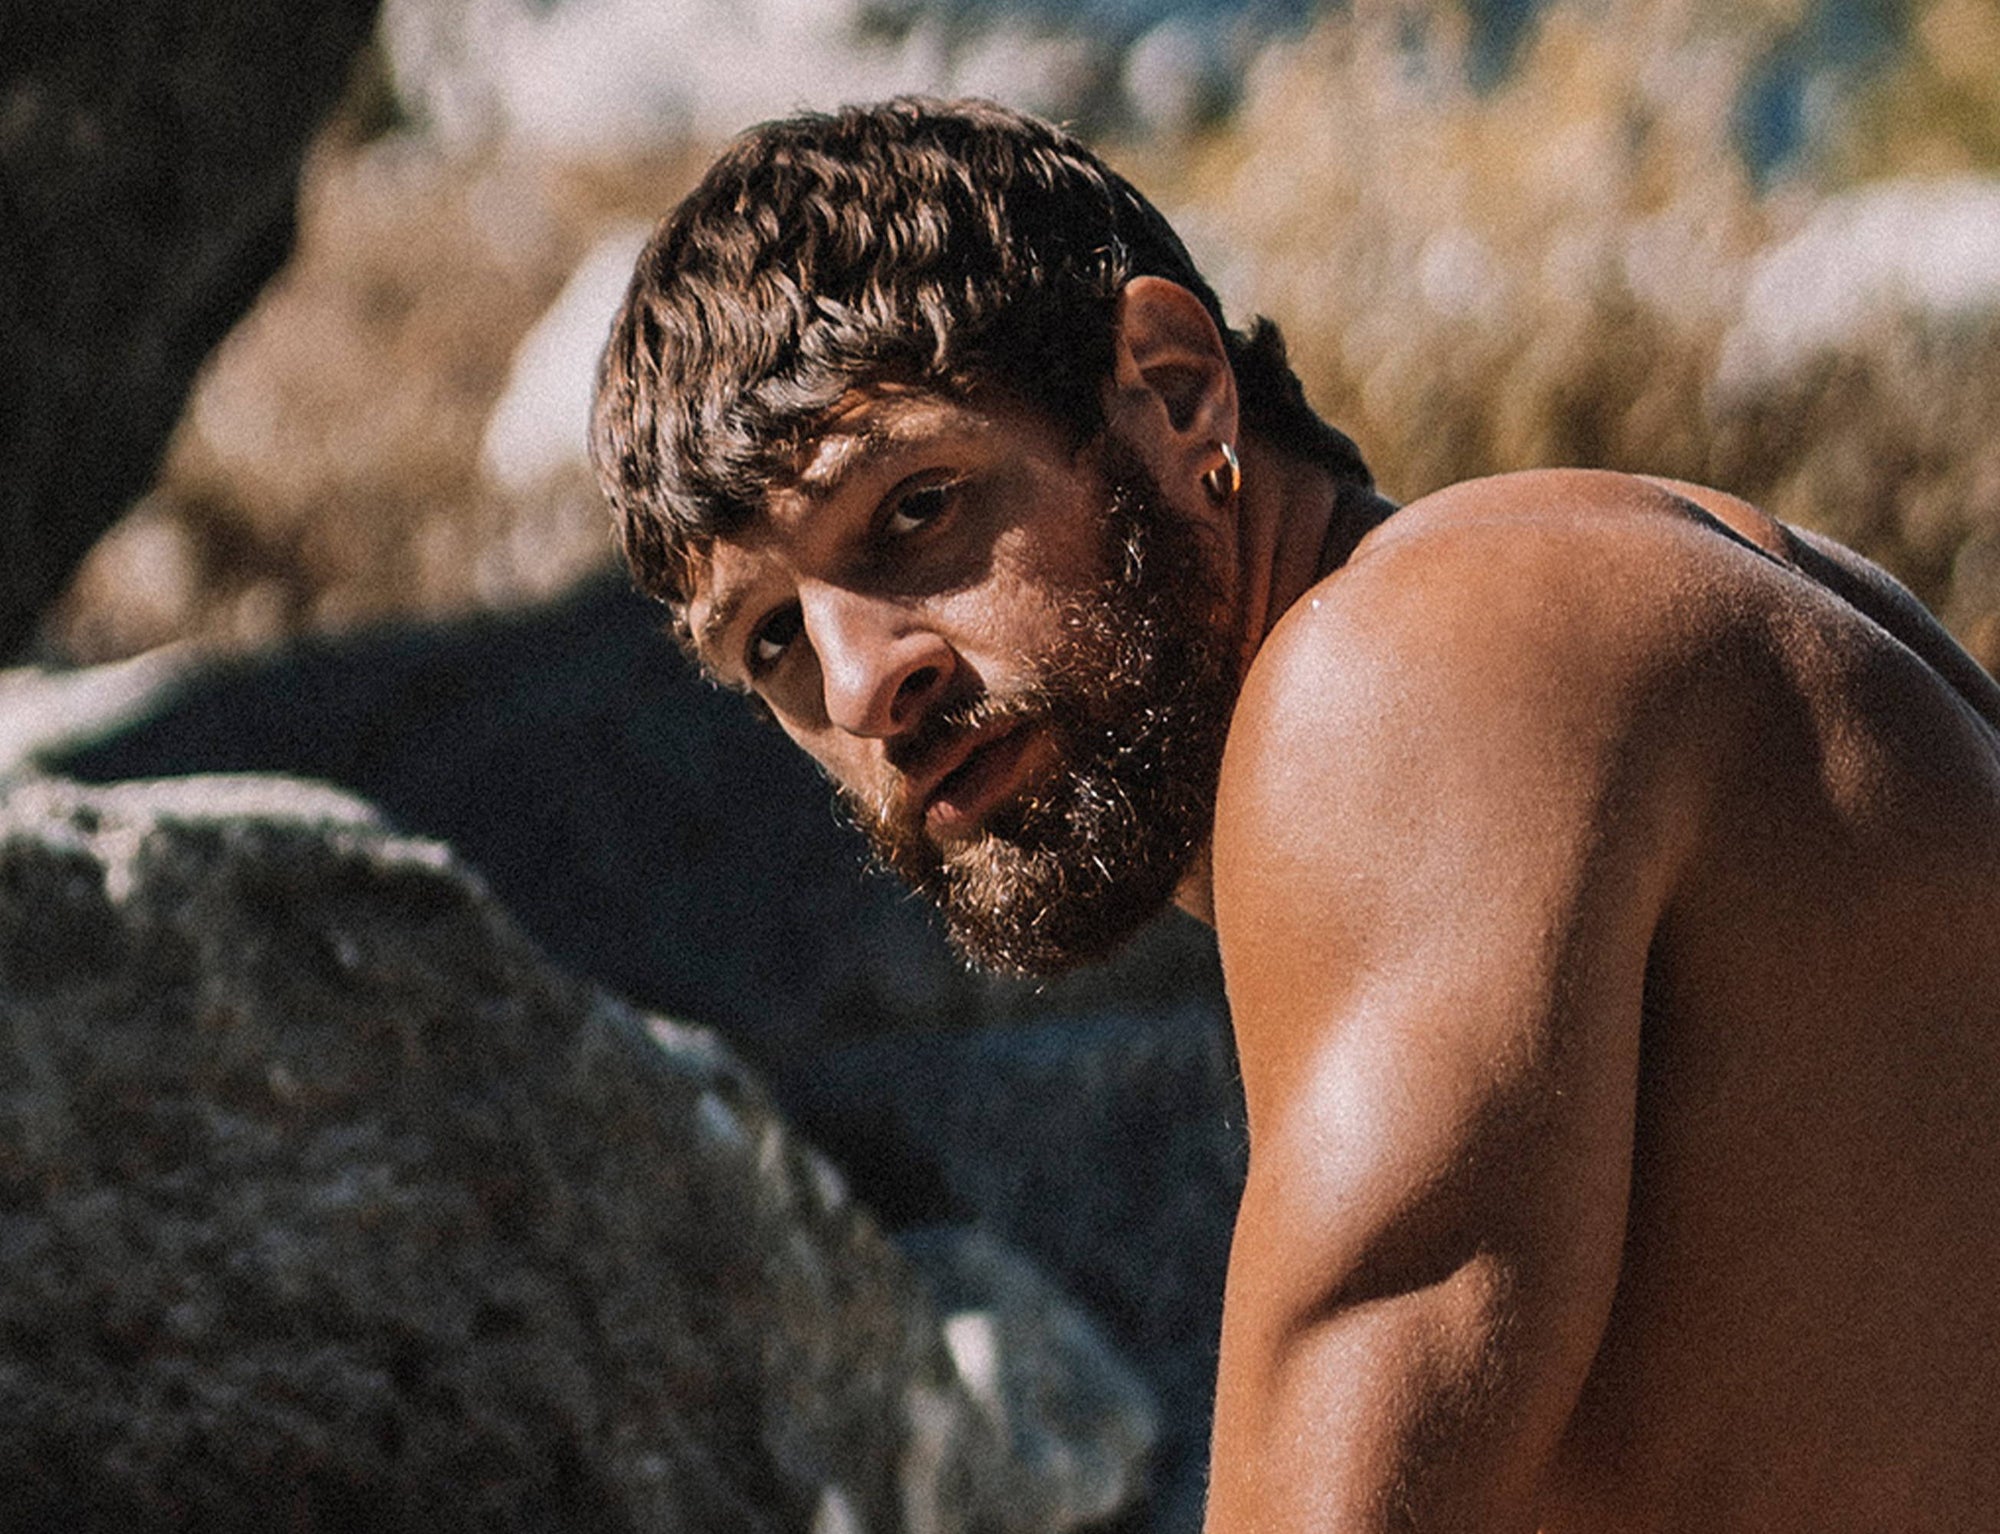 Seeing nature as an extension of his own spirit and body, Shamu Azizam tells Yummy about the ritual of being fully naked in nature and plans the hottest night of his life